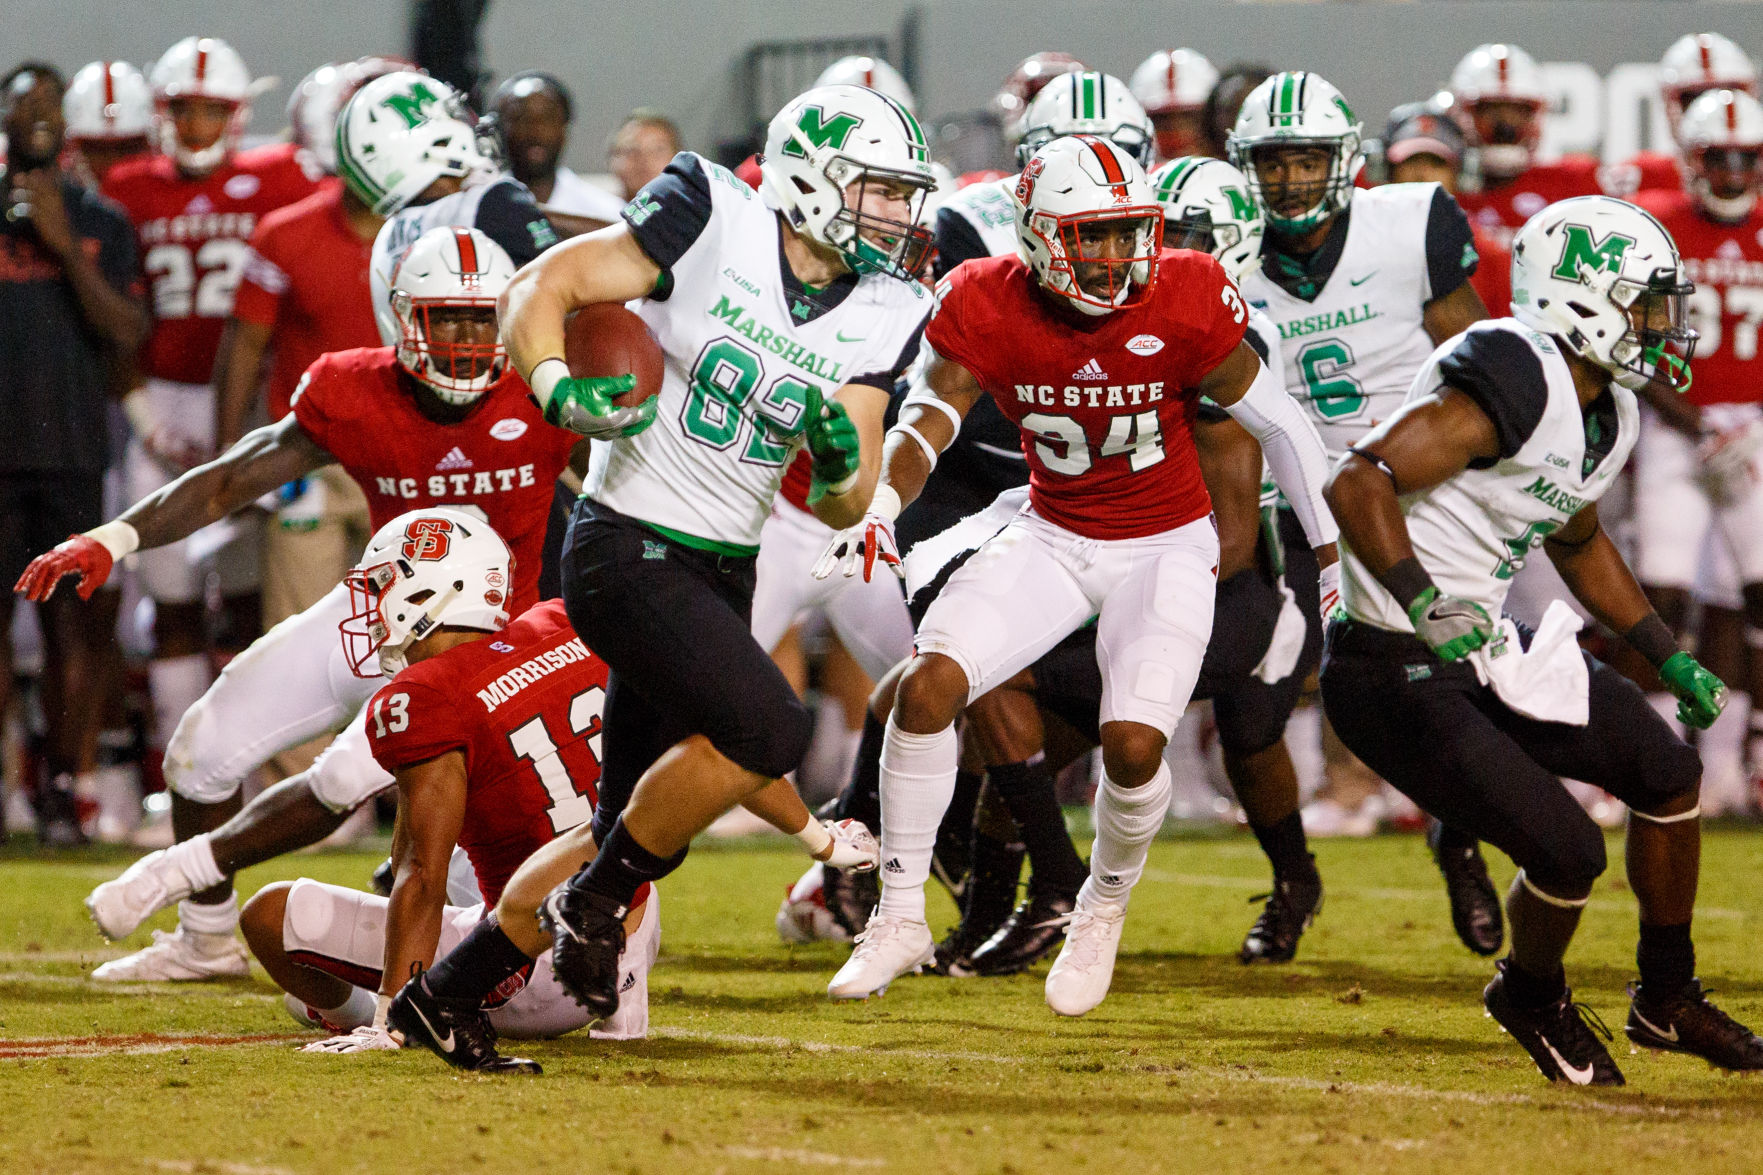 Finley throws 3 TDs, NC State beats Marshall 37-20